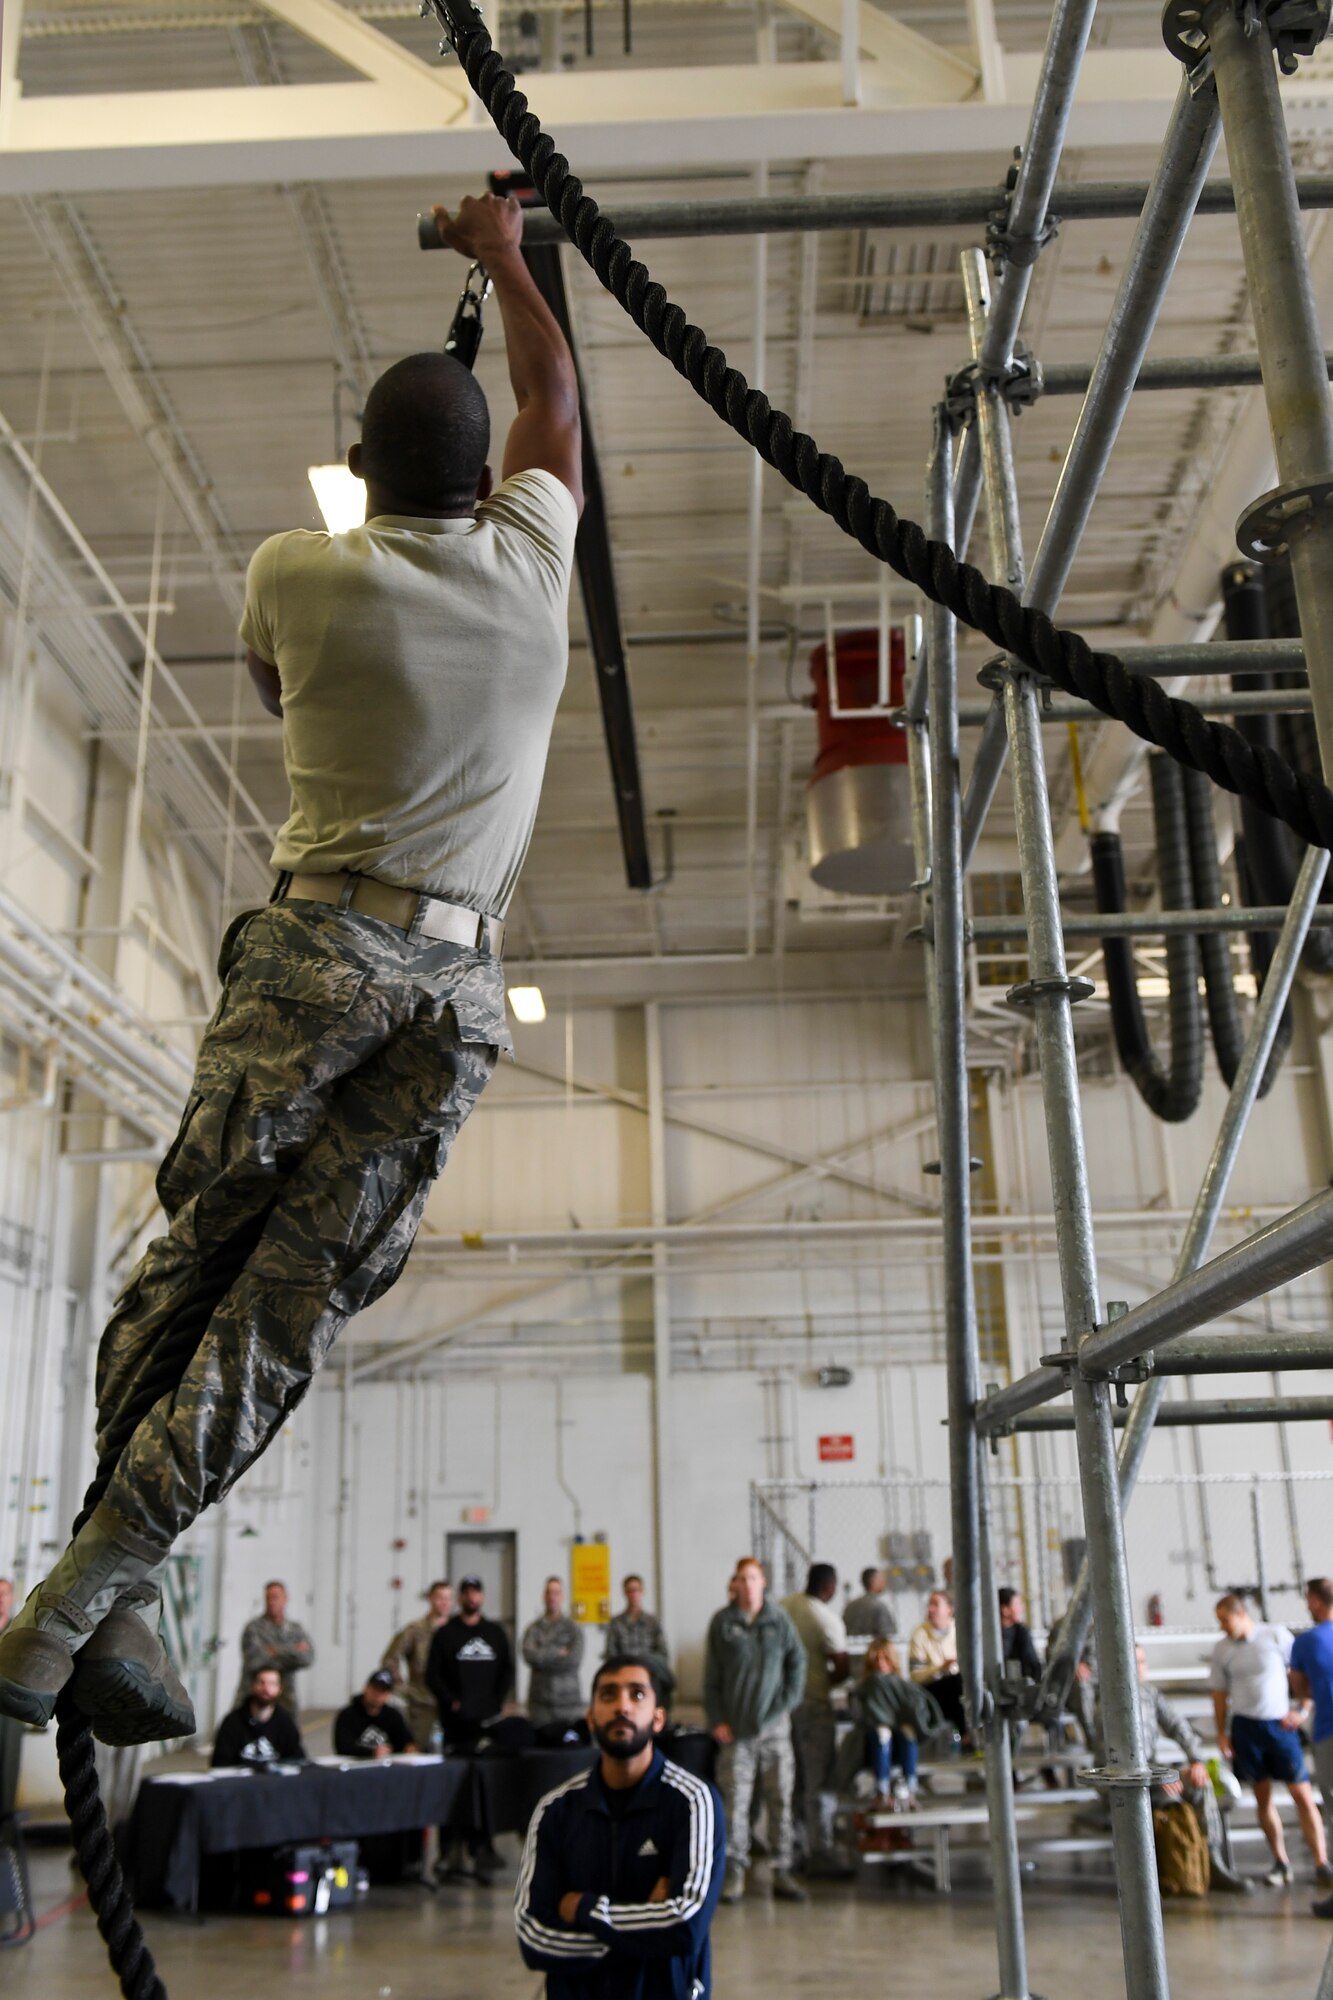 An Airman with the 911th Airlift Wing participates in a time challenge using the Alpha Warrior Battle Rig at the Pittsburgh International Airport Air Reserve Station, Pennsylvania, October 14, 2018. The battle rig is designed to meet all four of the Comprehensive Airman Fitness model's pillars: mental, physical, social and spiritual. (U.S. Air Force photo by Senior Airman Beth Kobily)